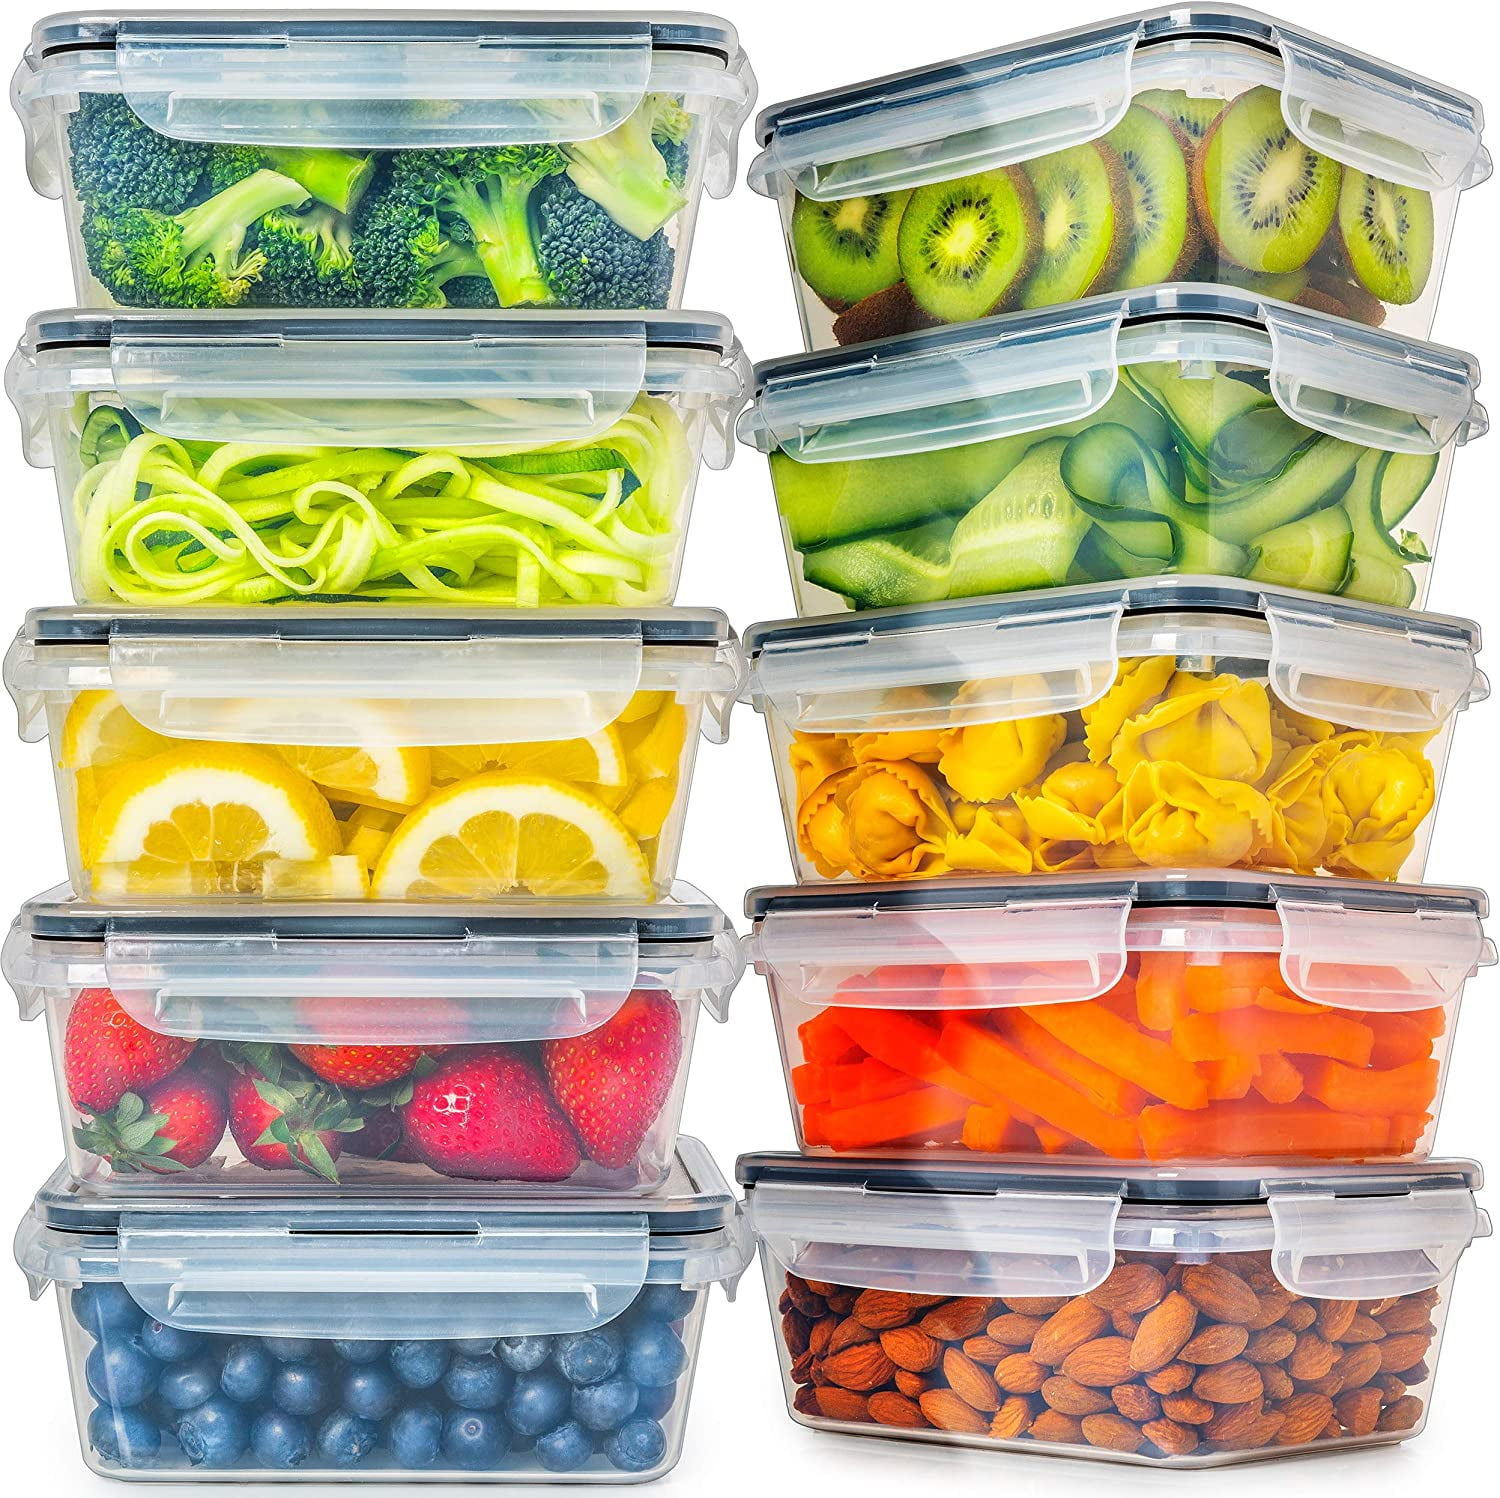 Fullstar large airtight food storage containers with lids - air